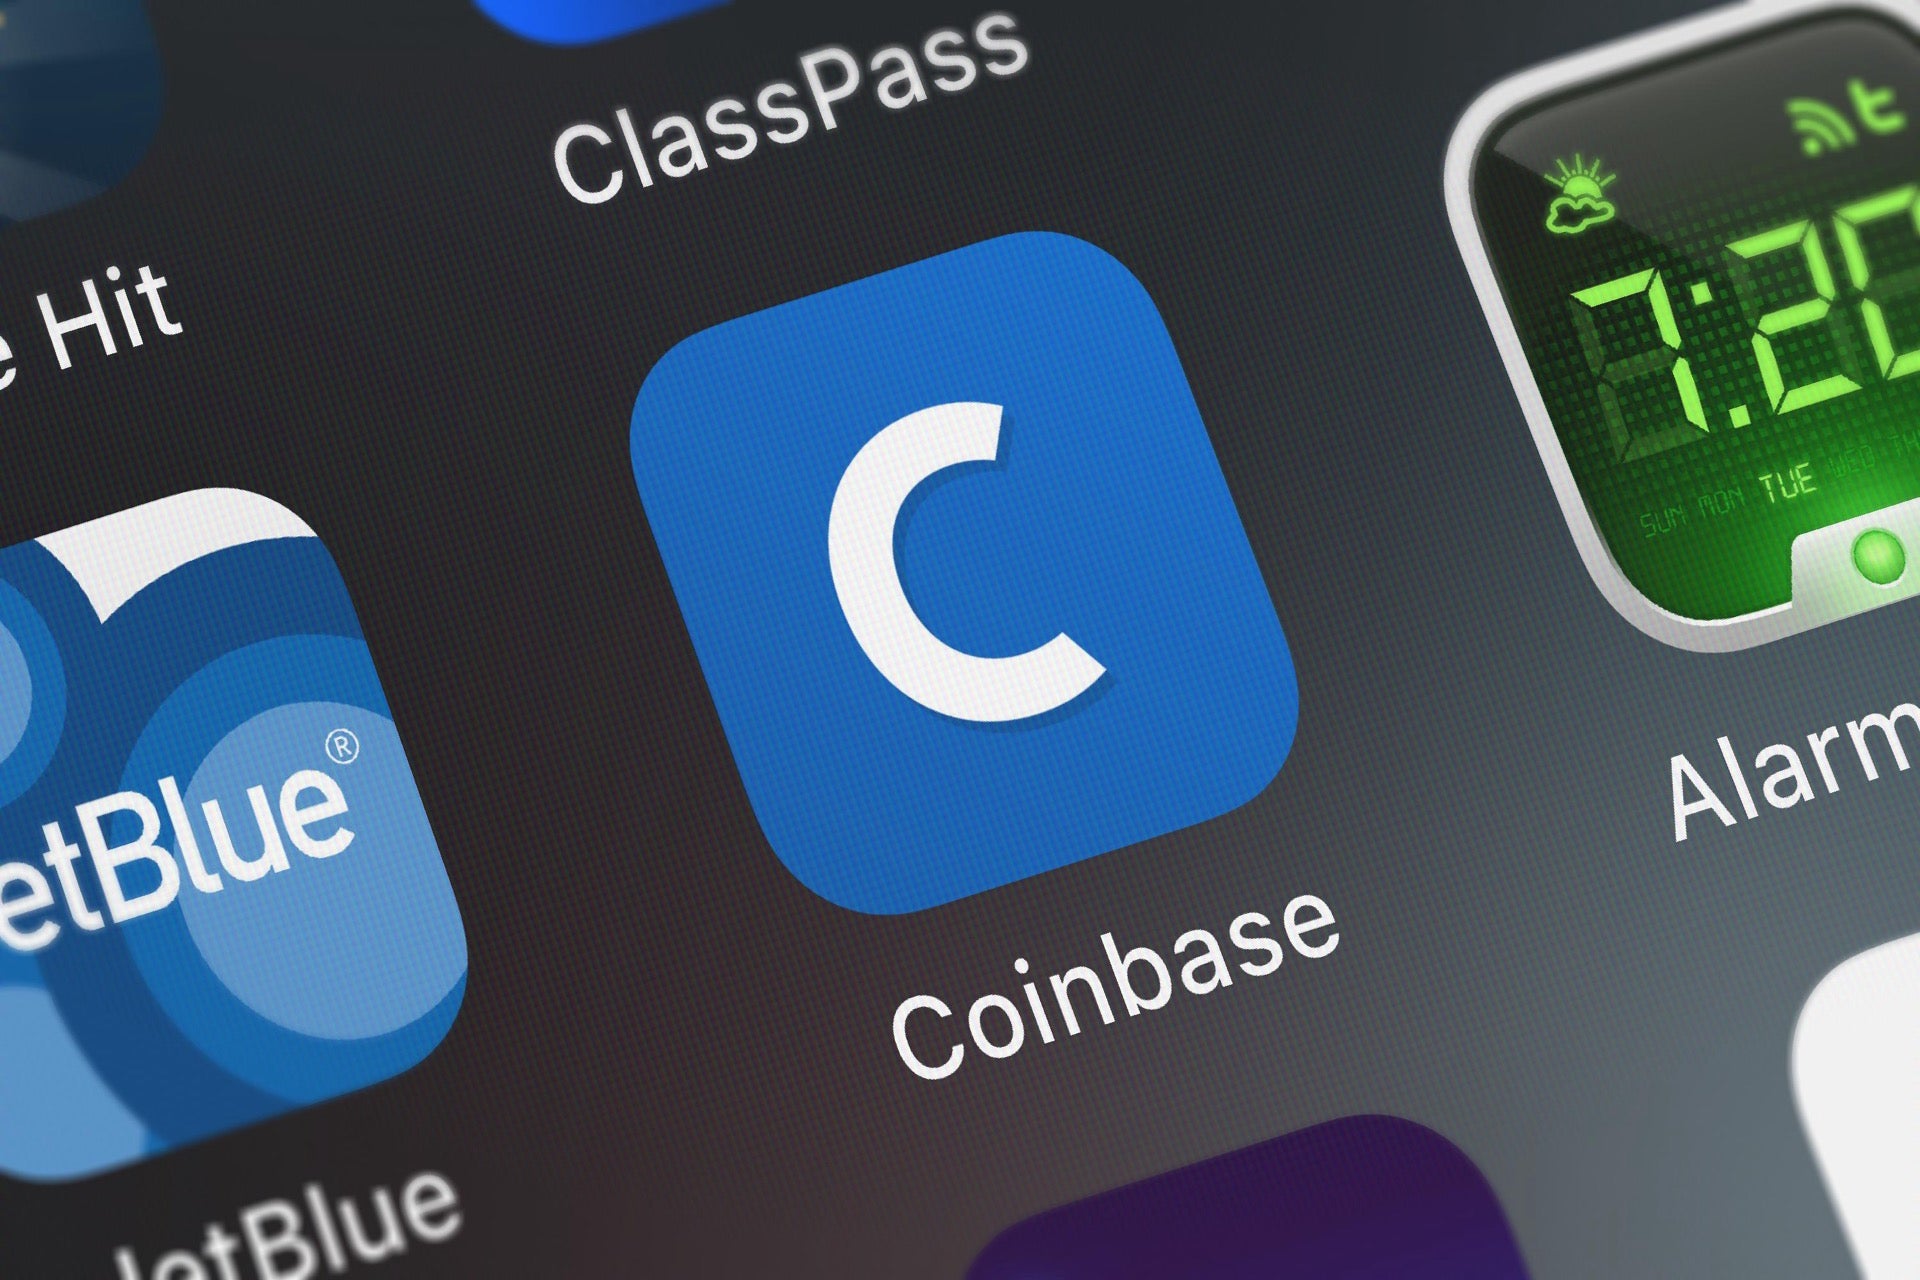 JP Morgan: Our important bitcoin client Coinbase is going to be fine